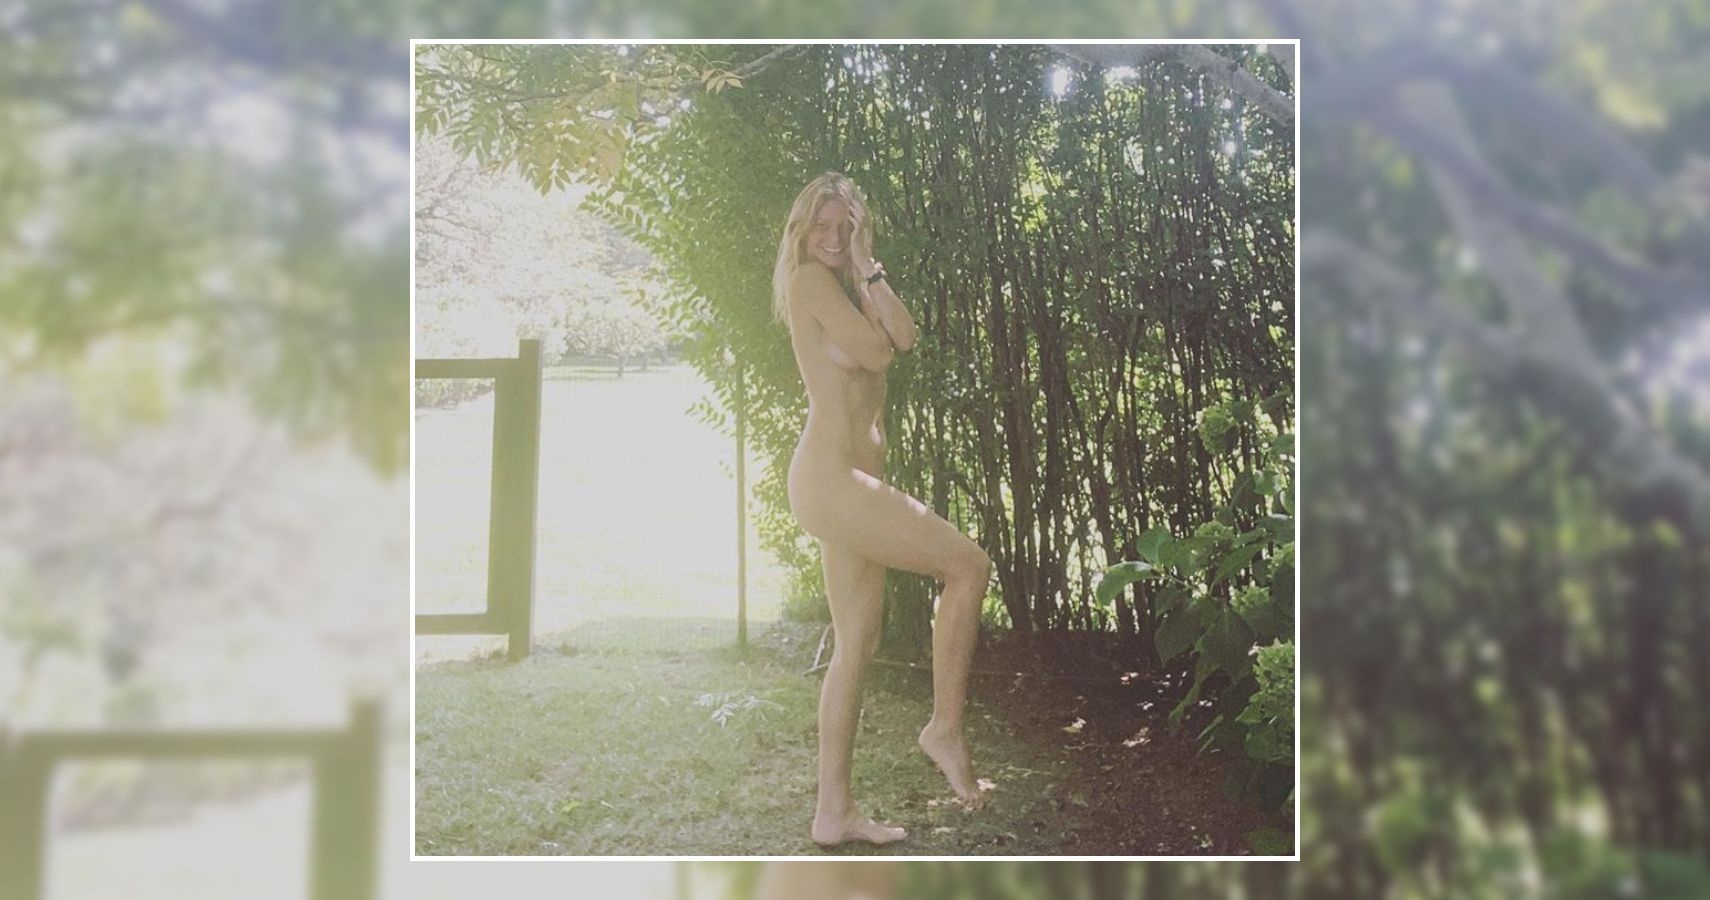 Gwyneth Paltrow’s Daughter Had Hilarious Reaction To Her ‘Birthday Suit’ Tribute